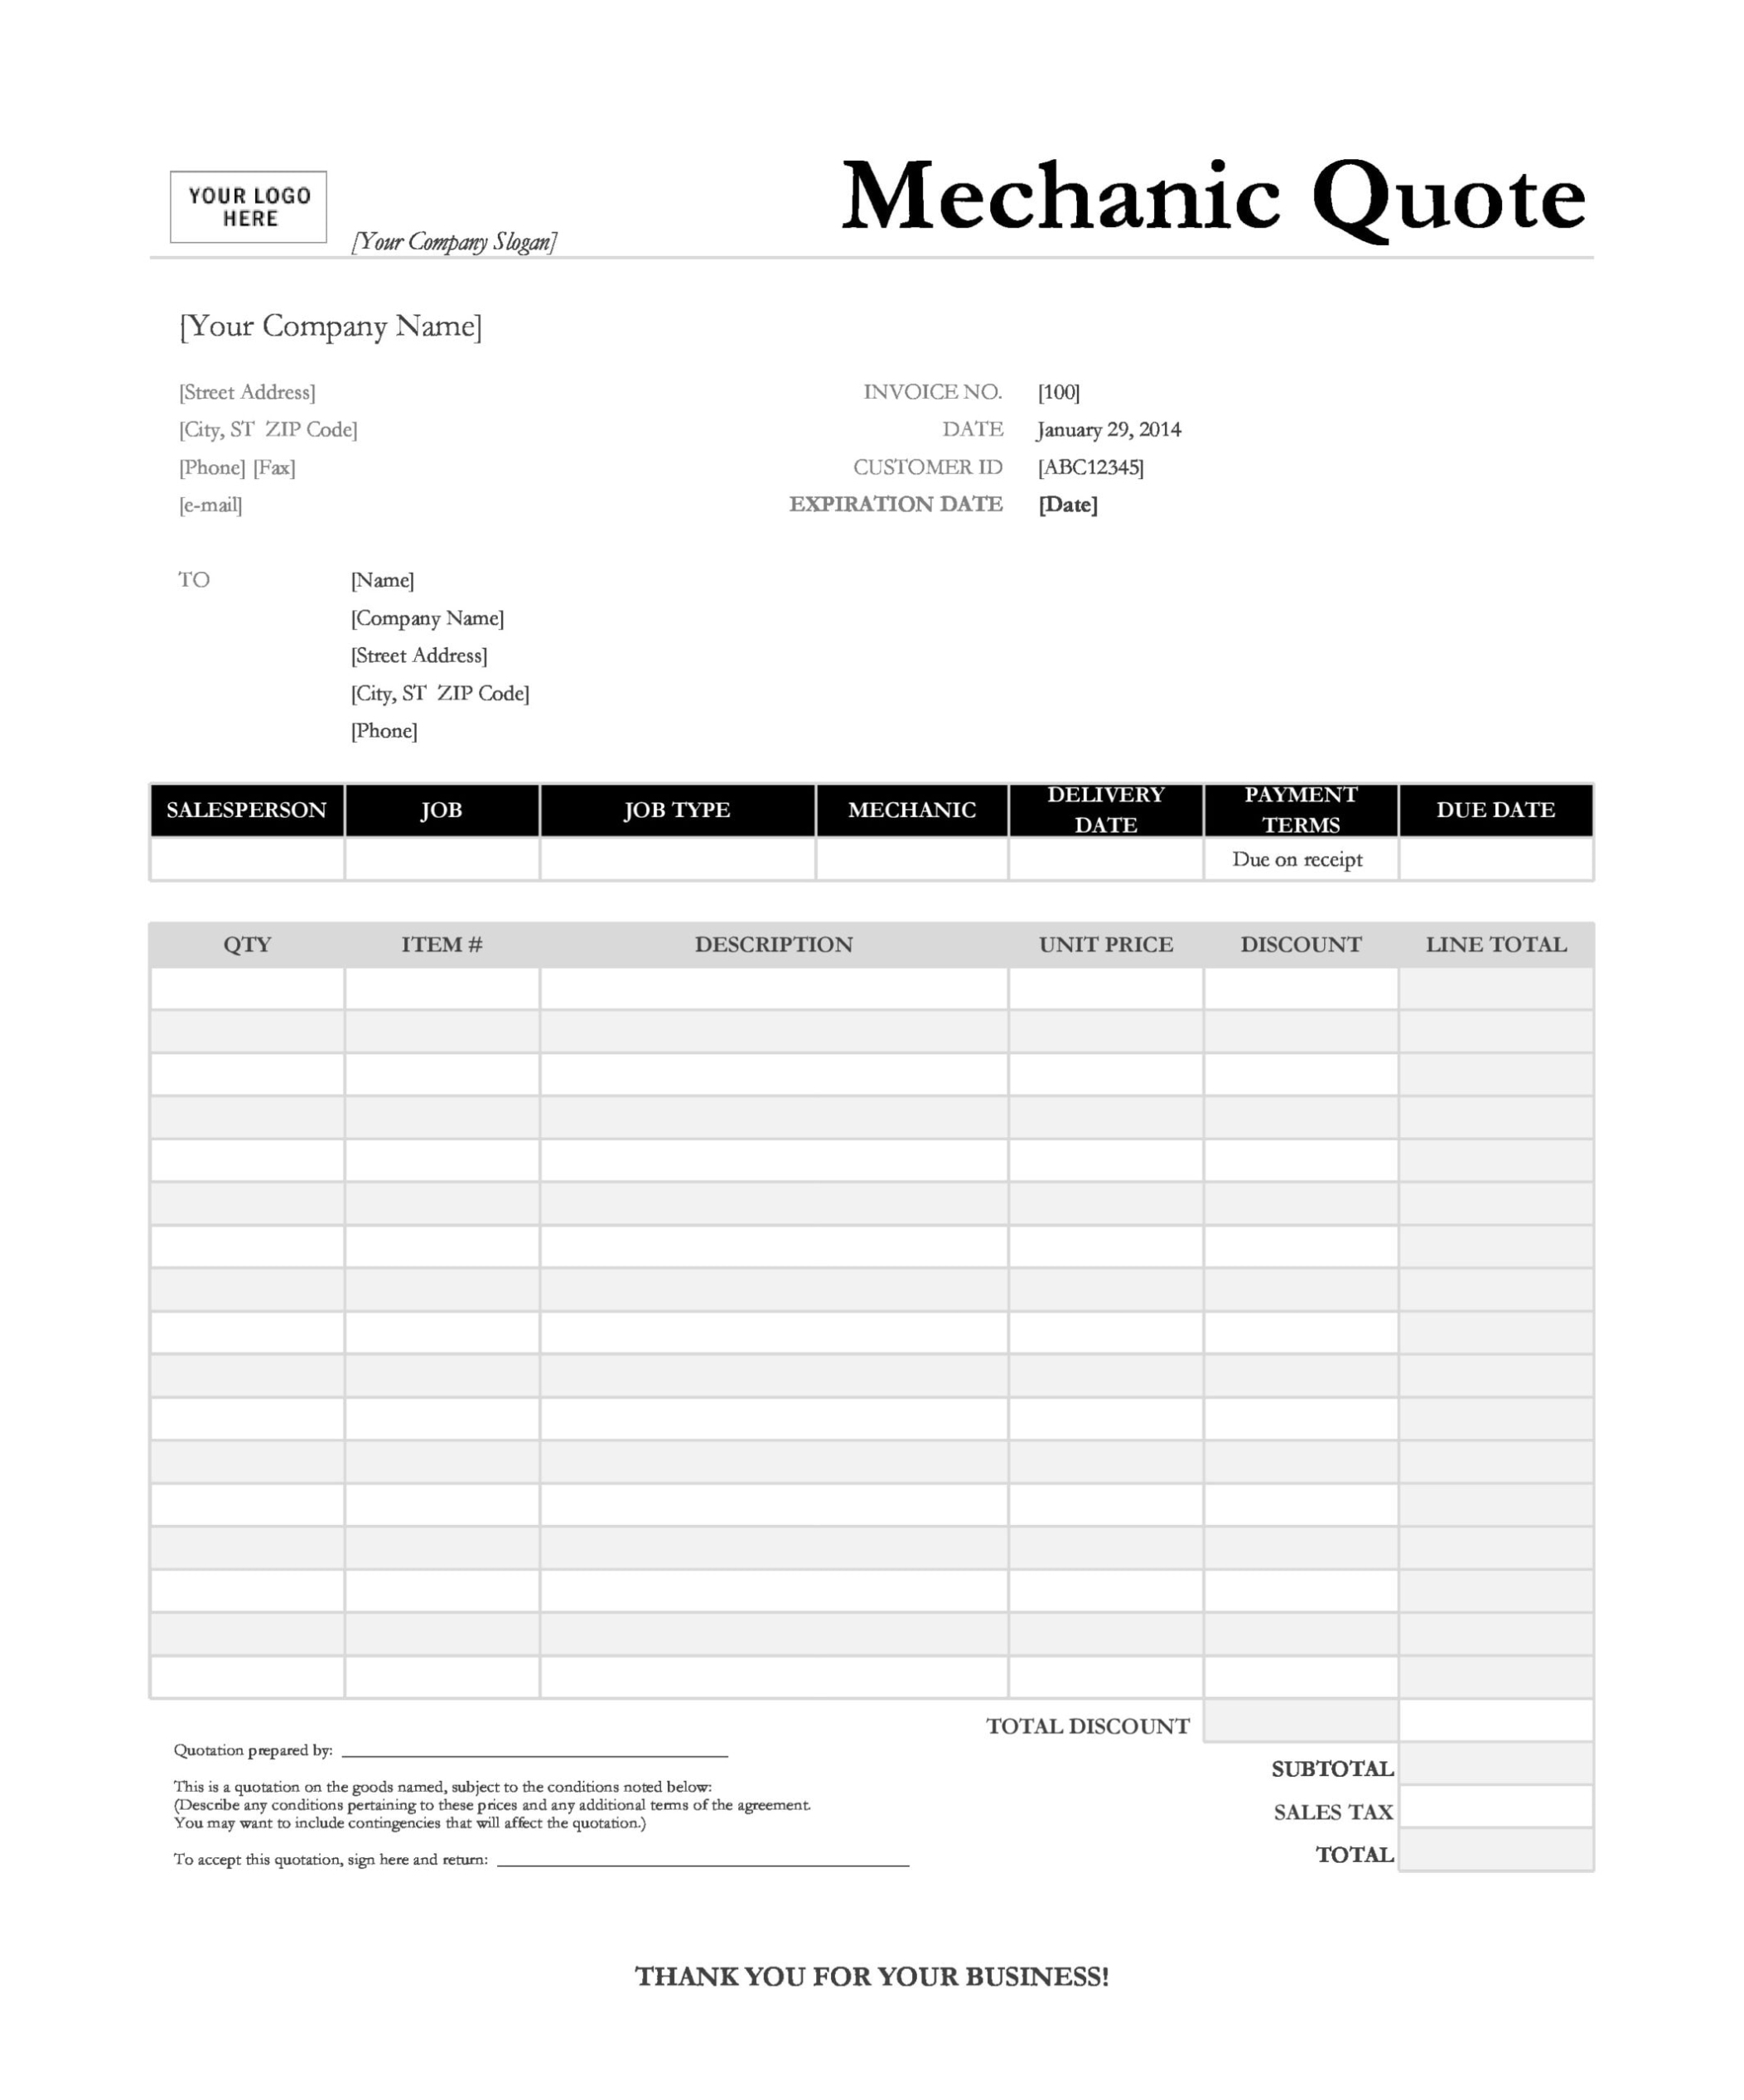 30 Real & Fake Auto Repair Invoices [Free] - Templatearchive Regarding Mechanic Shop Invoice Templates